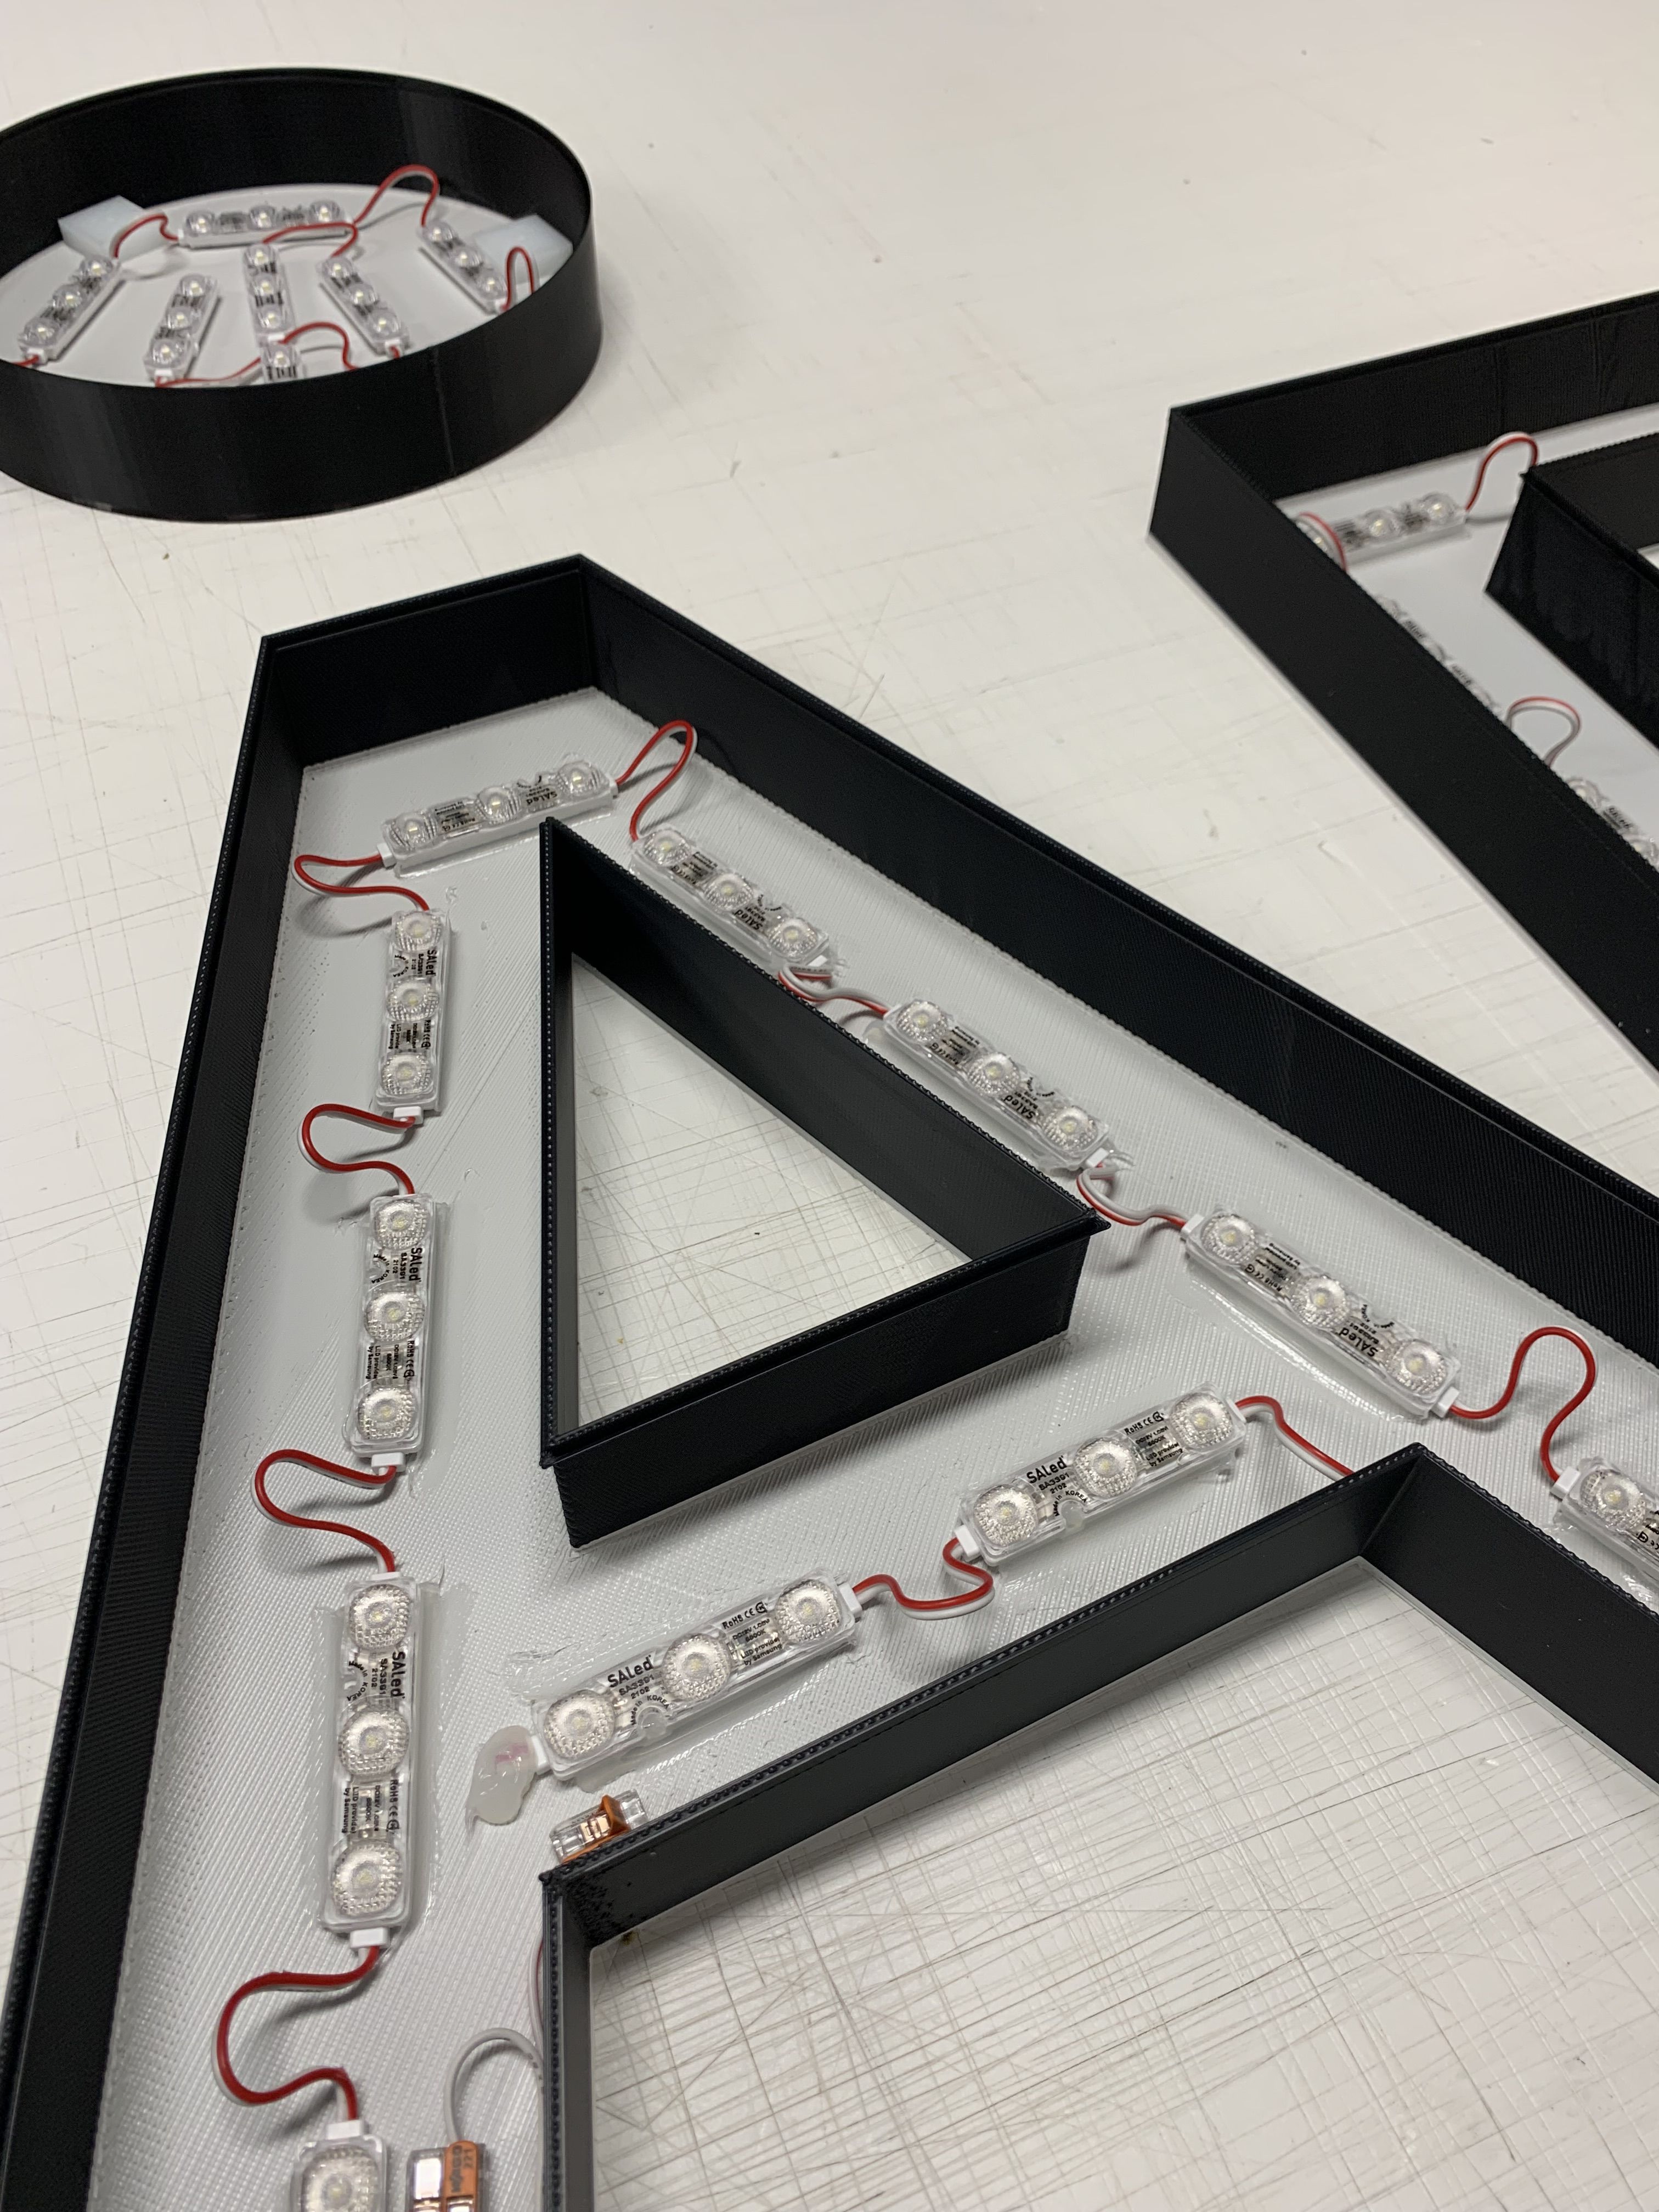 3D Printed Letters Exposed LEDs